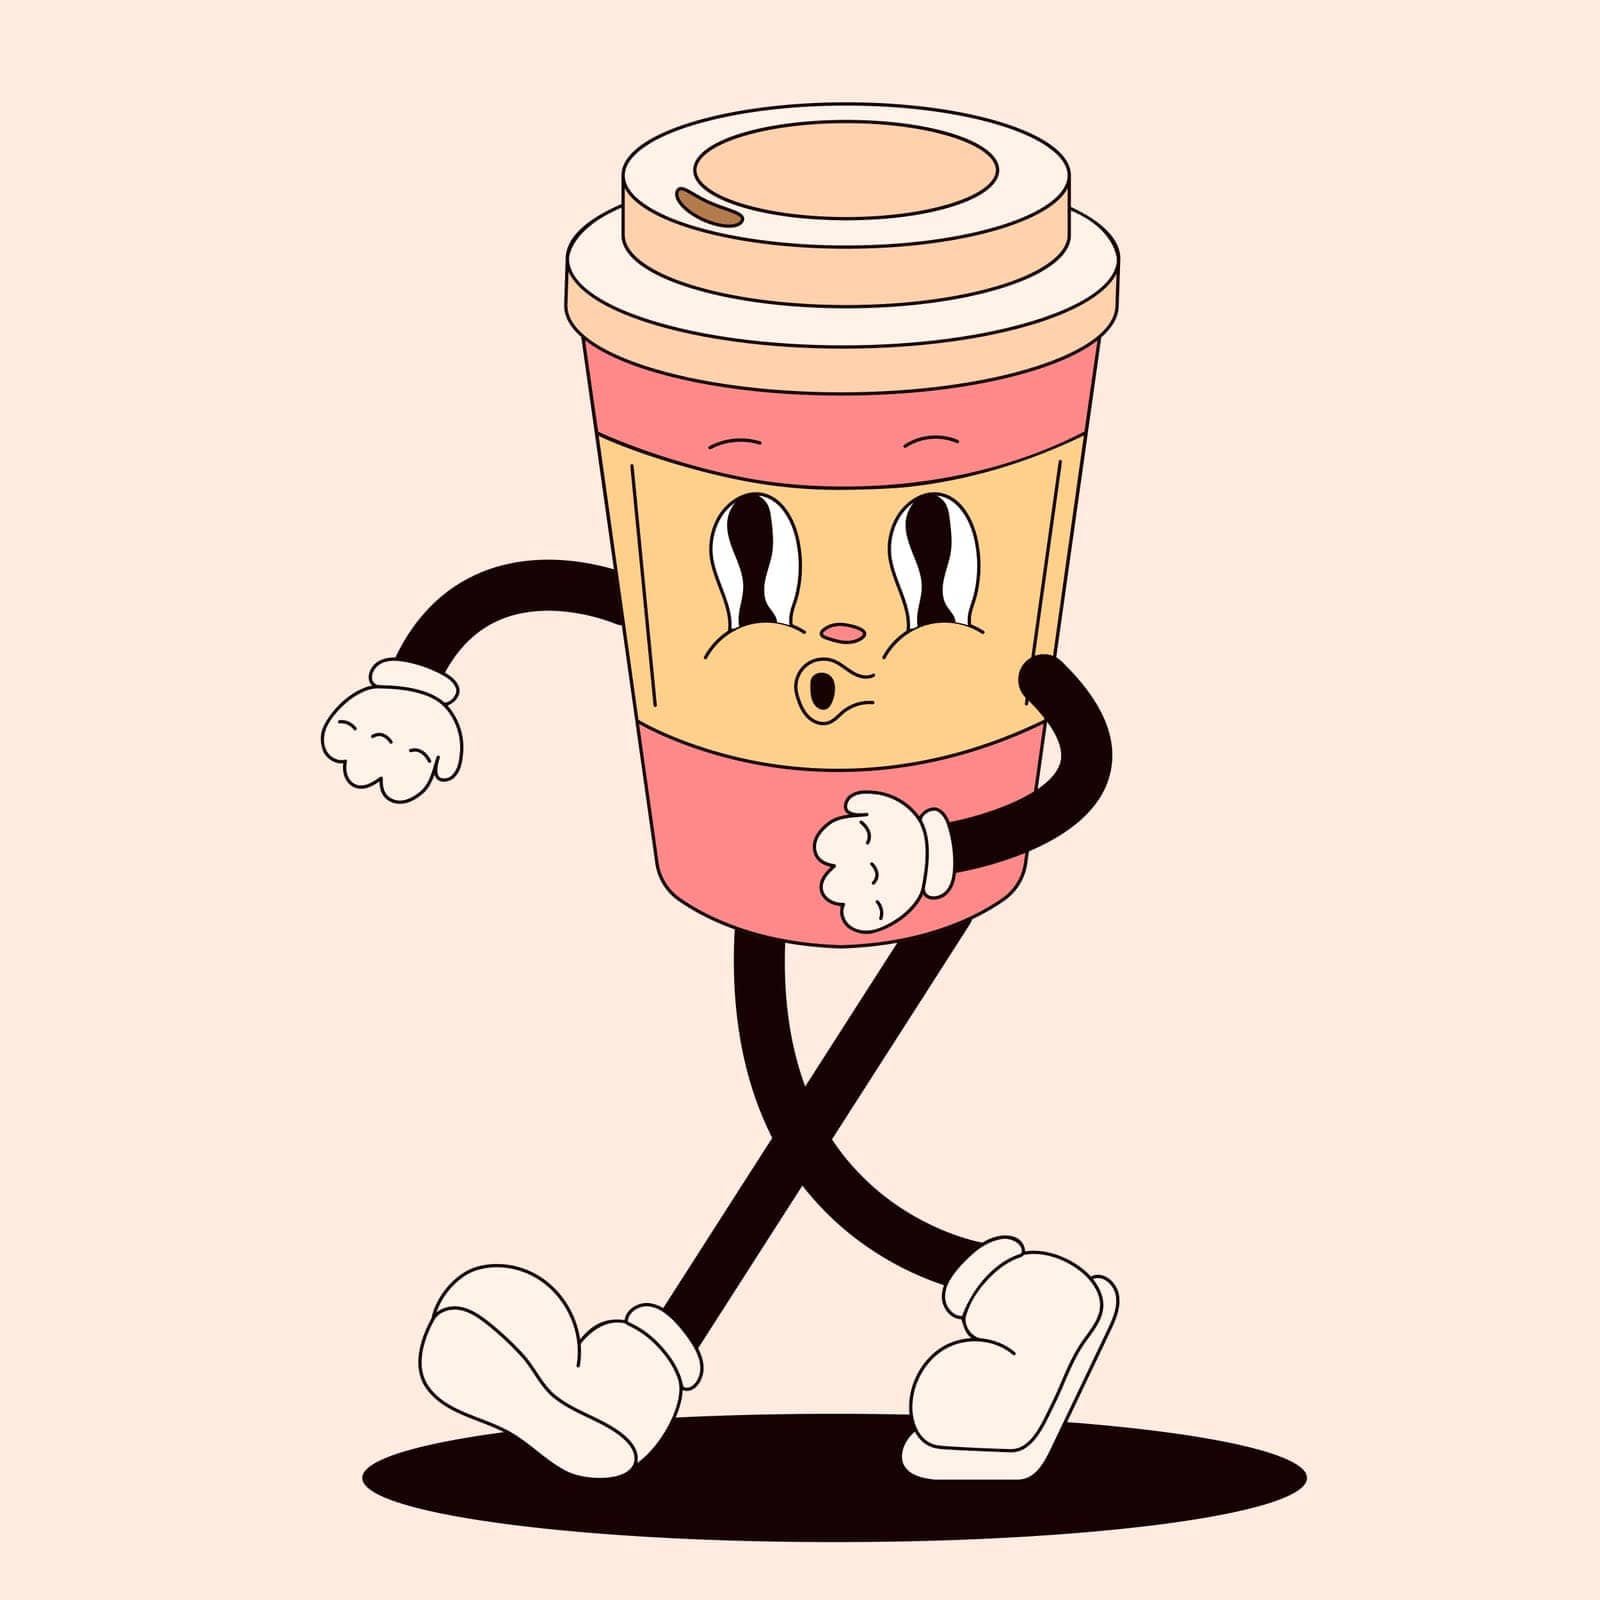 Retro groovy character in the form of a disposable cup. Walking cartoon masco. Hand drawn vector illustration isolated on a peach background. by IrynaShautsova